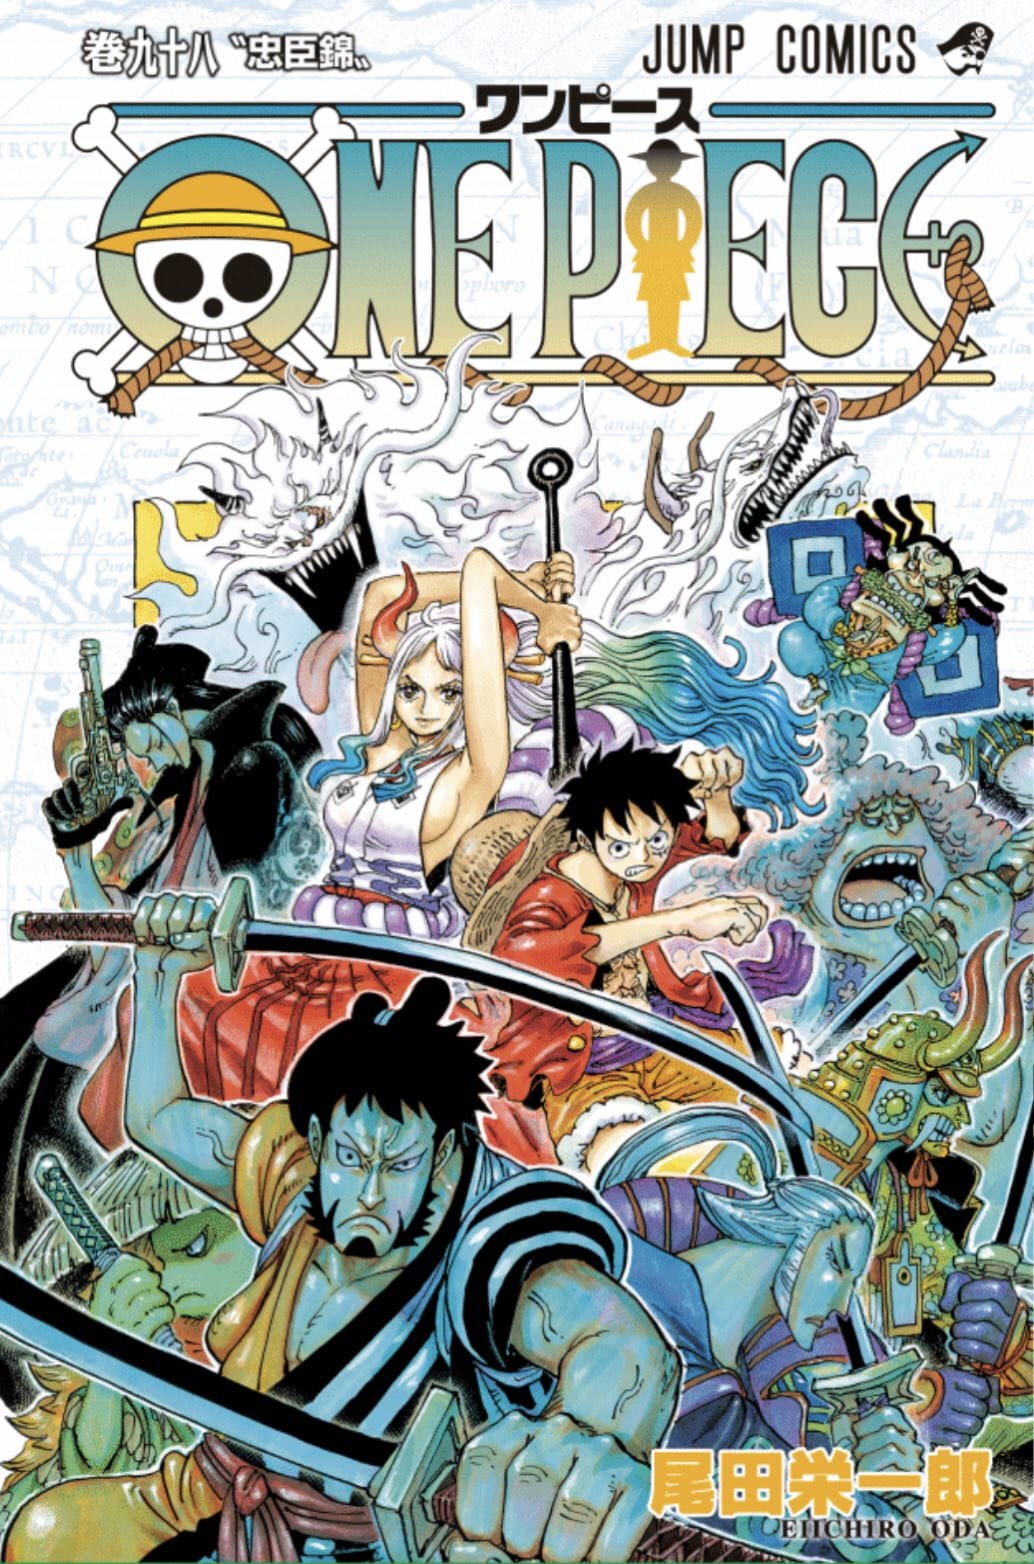 ONE PIECE ワンピース www.justice.gouv.cd